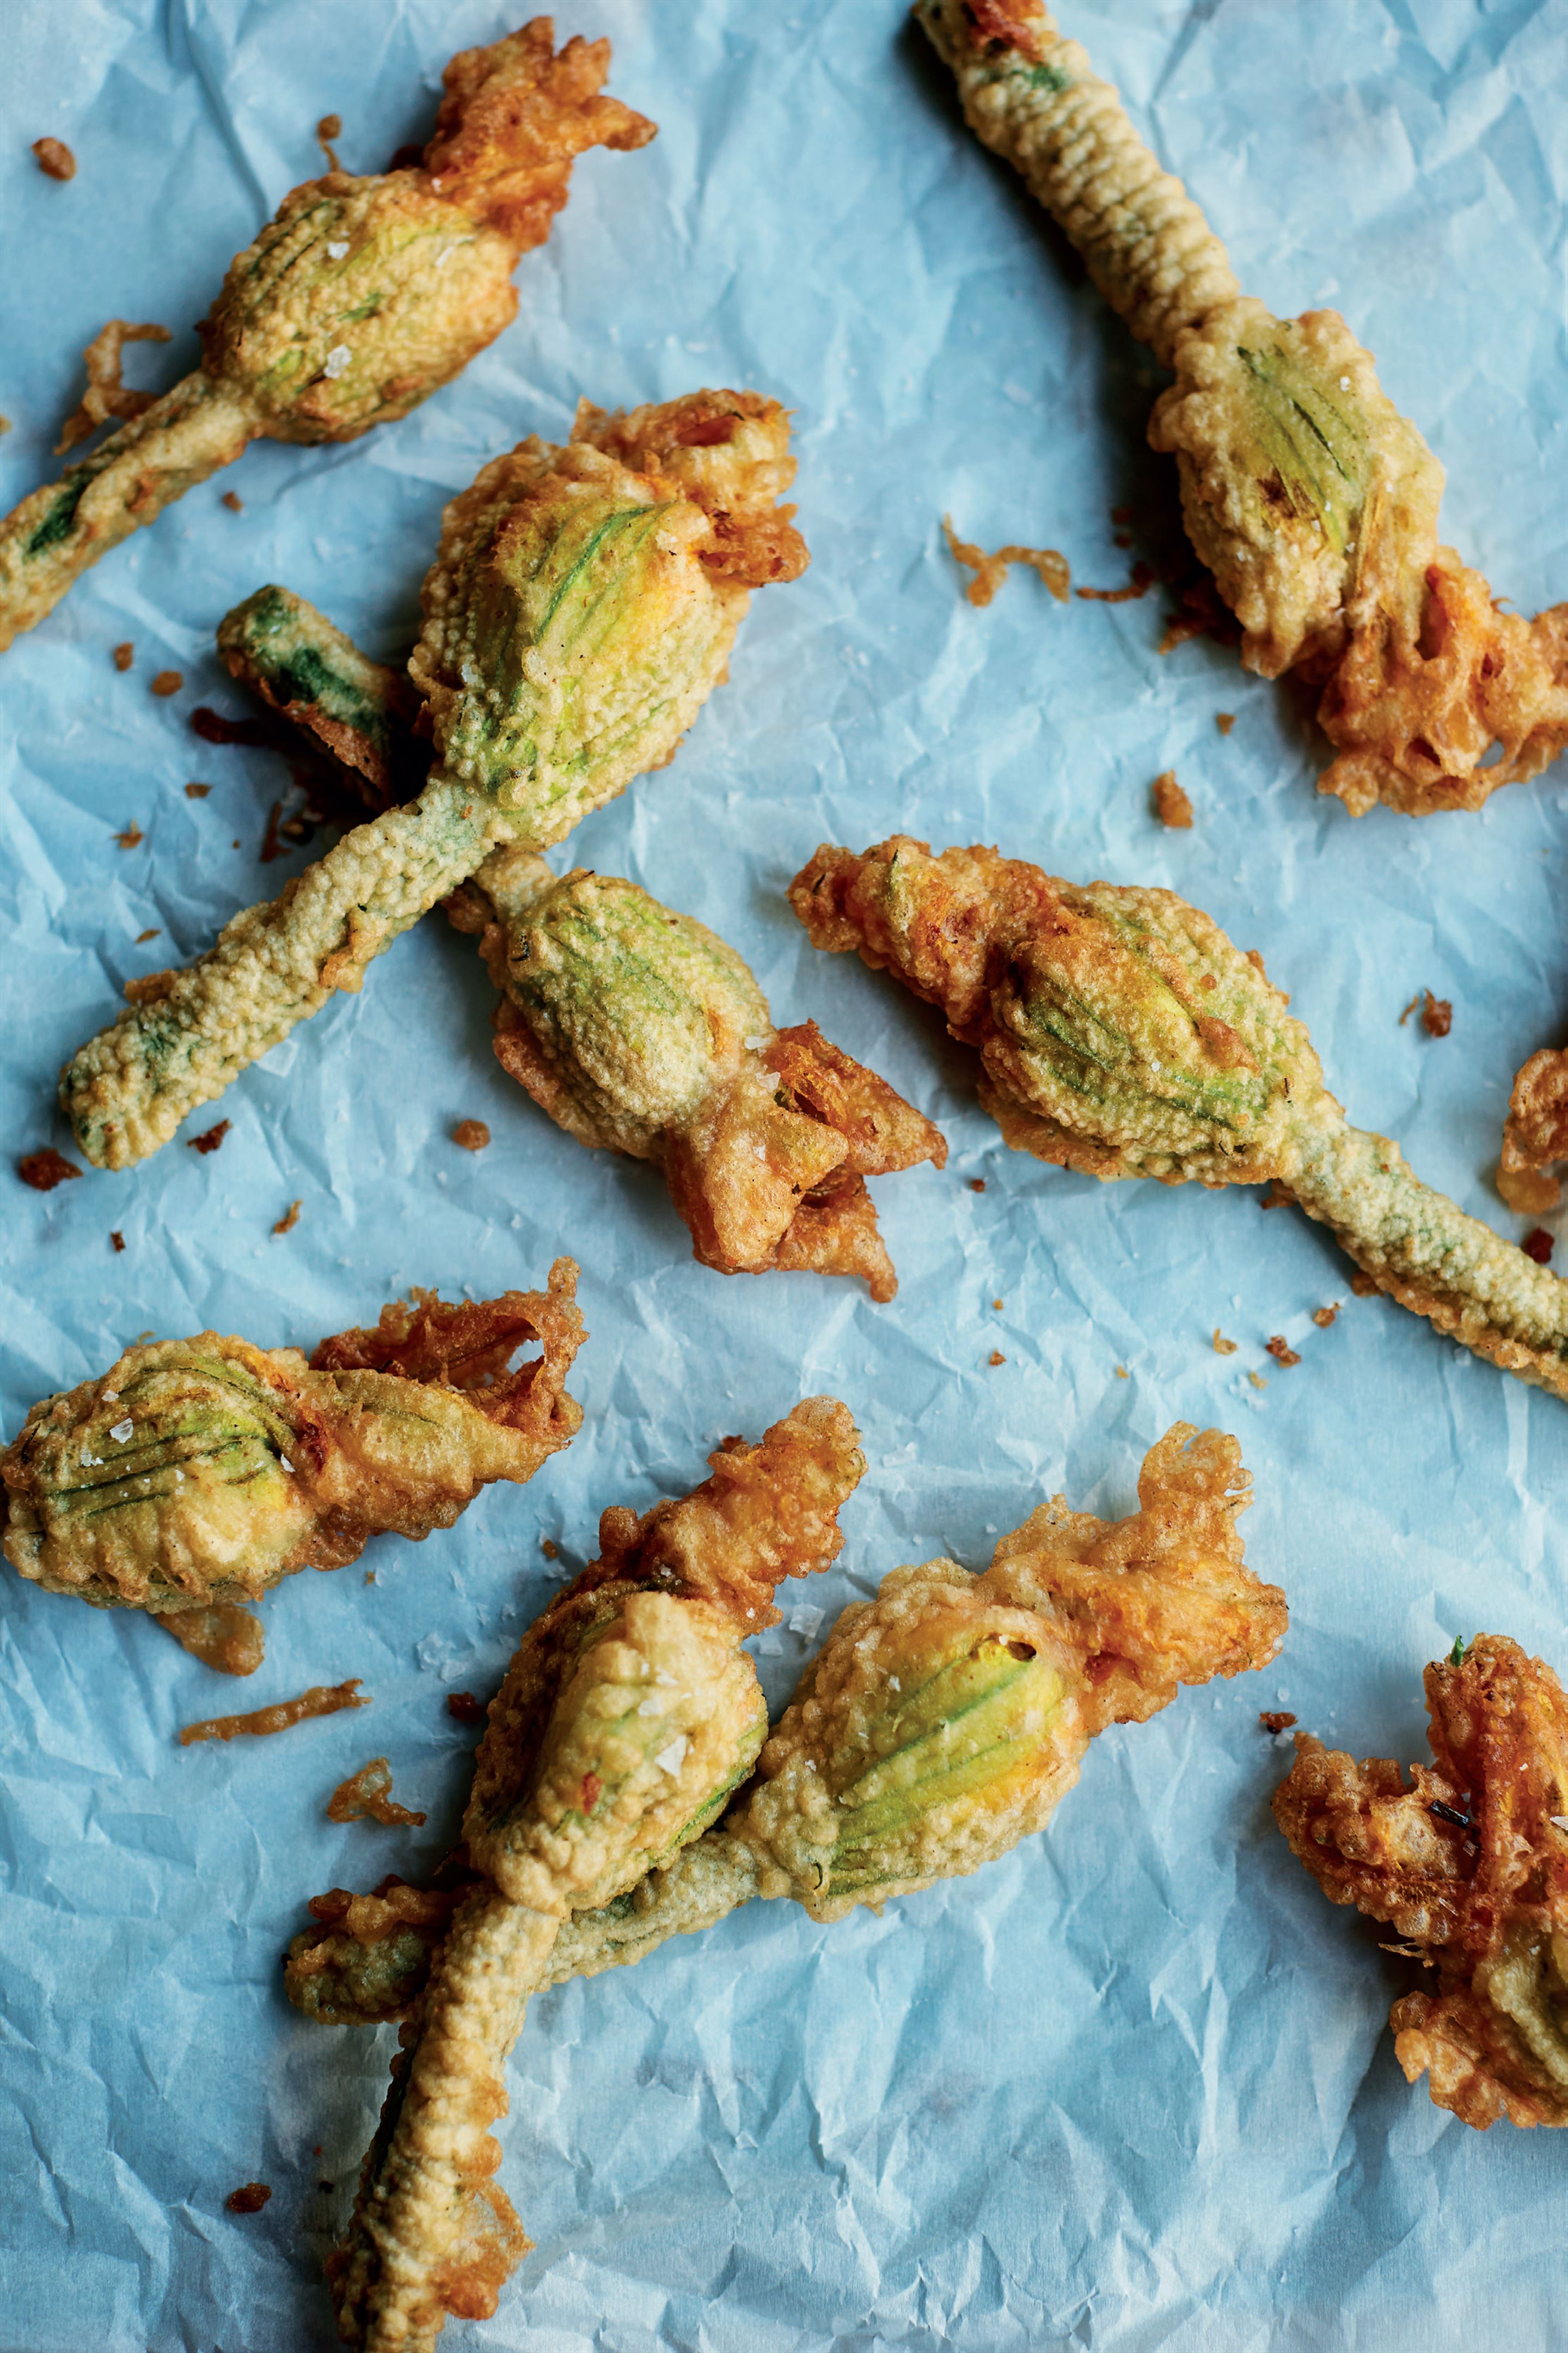 Stuffed courgette flowers